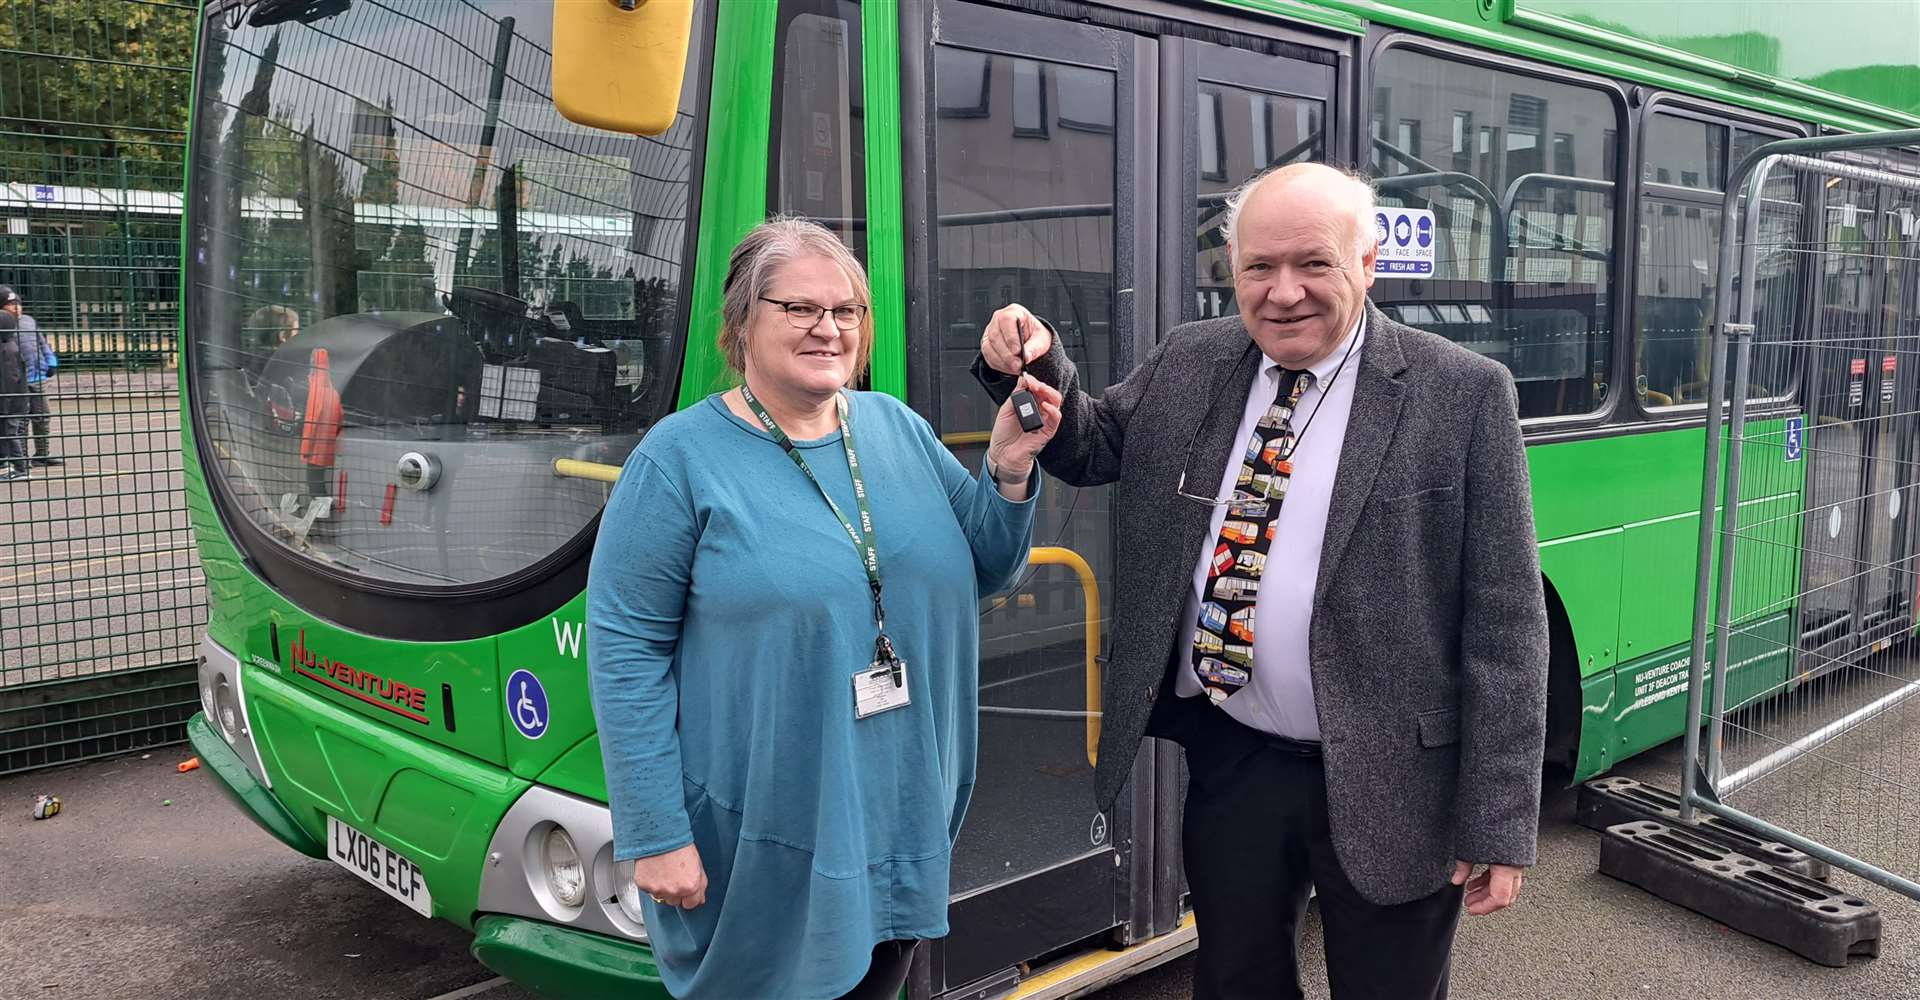 School principal Peggy Murphy accepts the keys to the bus from Norman Kemp